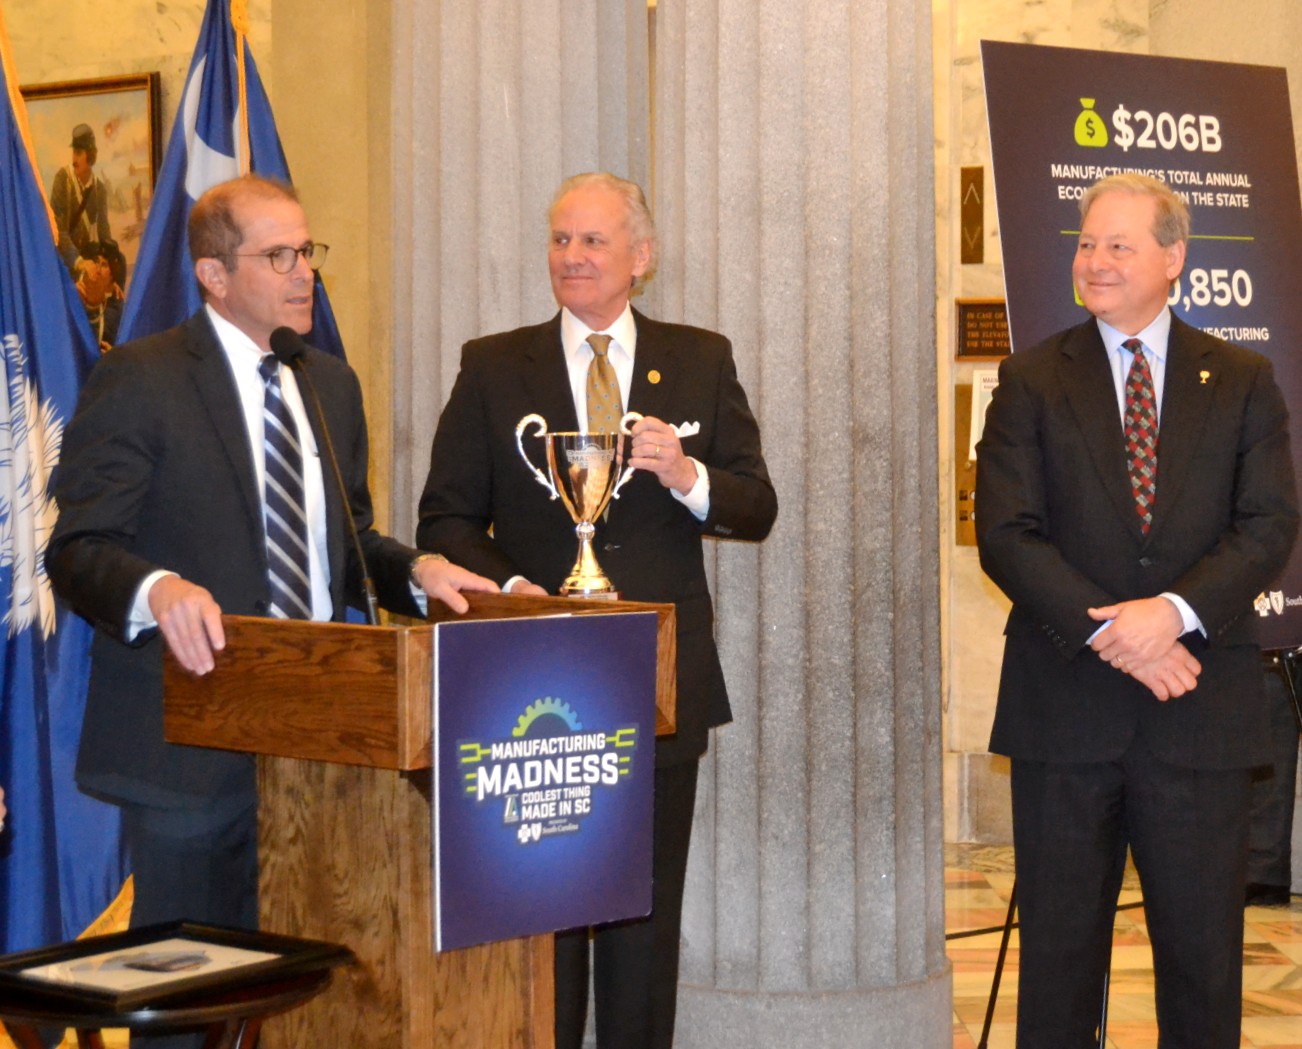 Mike Lee, vice president and general manager of Nucor Steel Berkeley, accepts the 'Coolest Thing Made in SC' trophy from S.C. Gov. Henry McMaster and S.C. Secretary of Commerce Harry Lightsey on Wednesday at the Statehouse. (Photo/Melinda Waldrop)